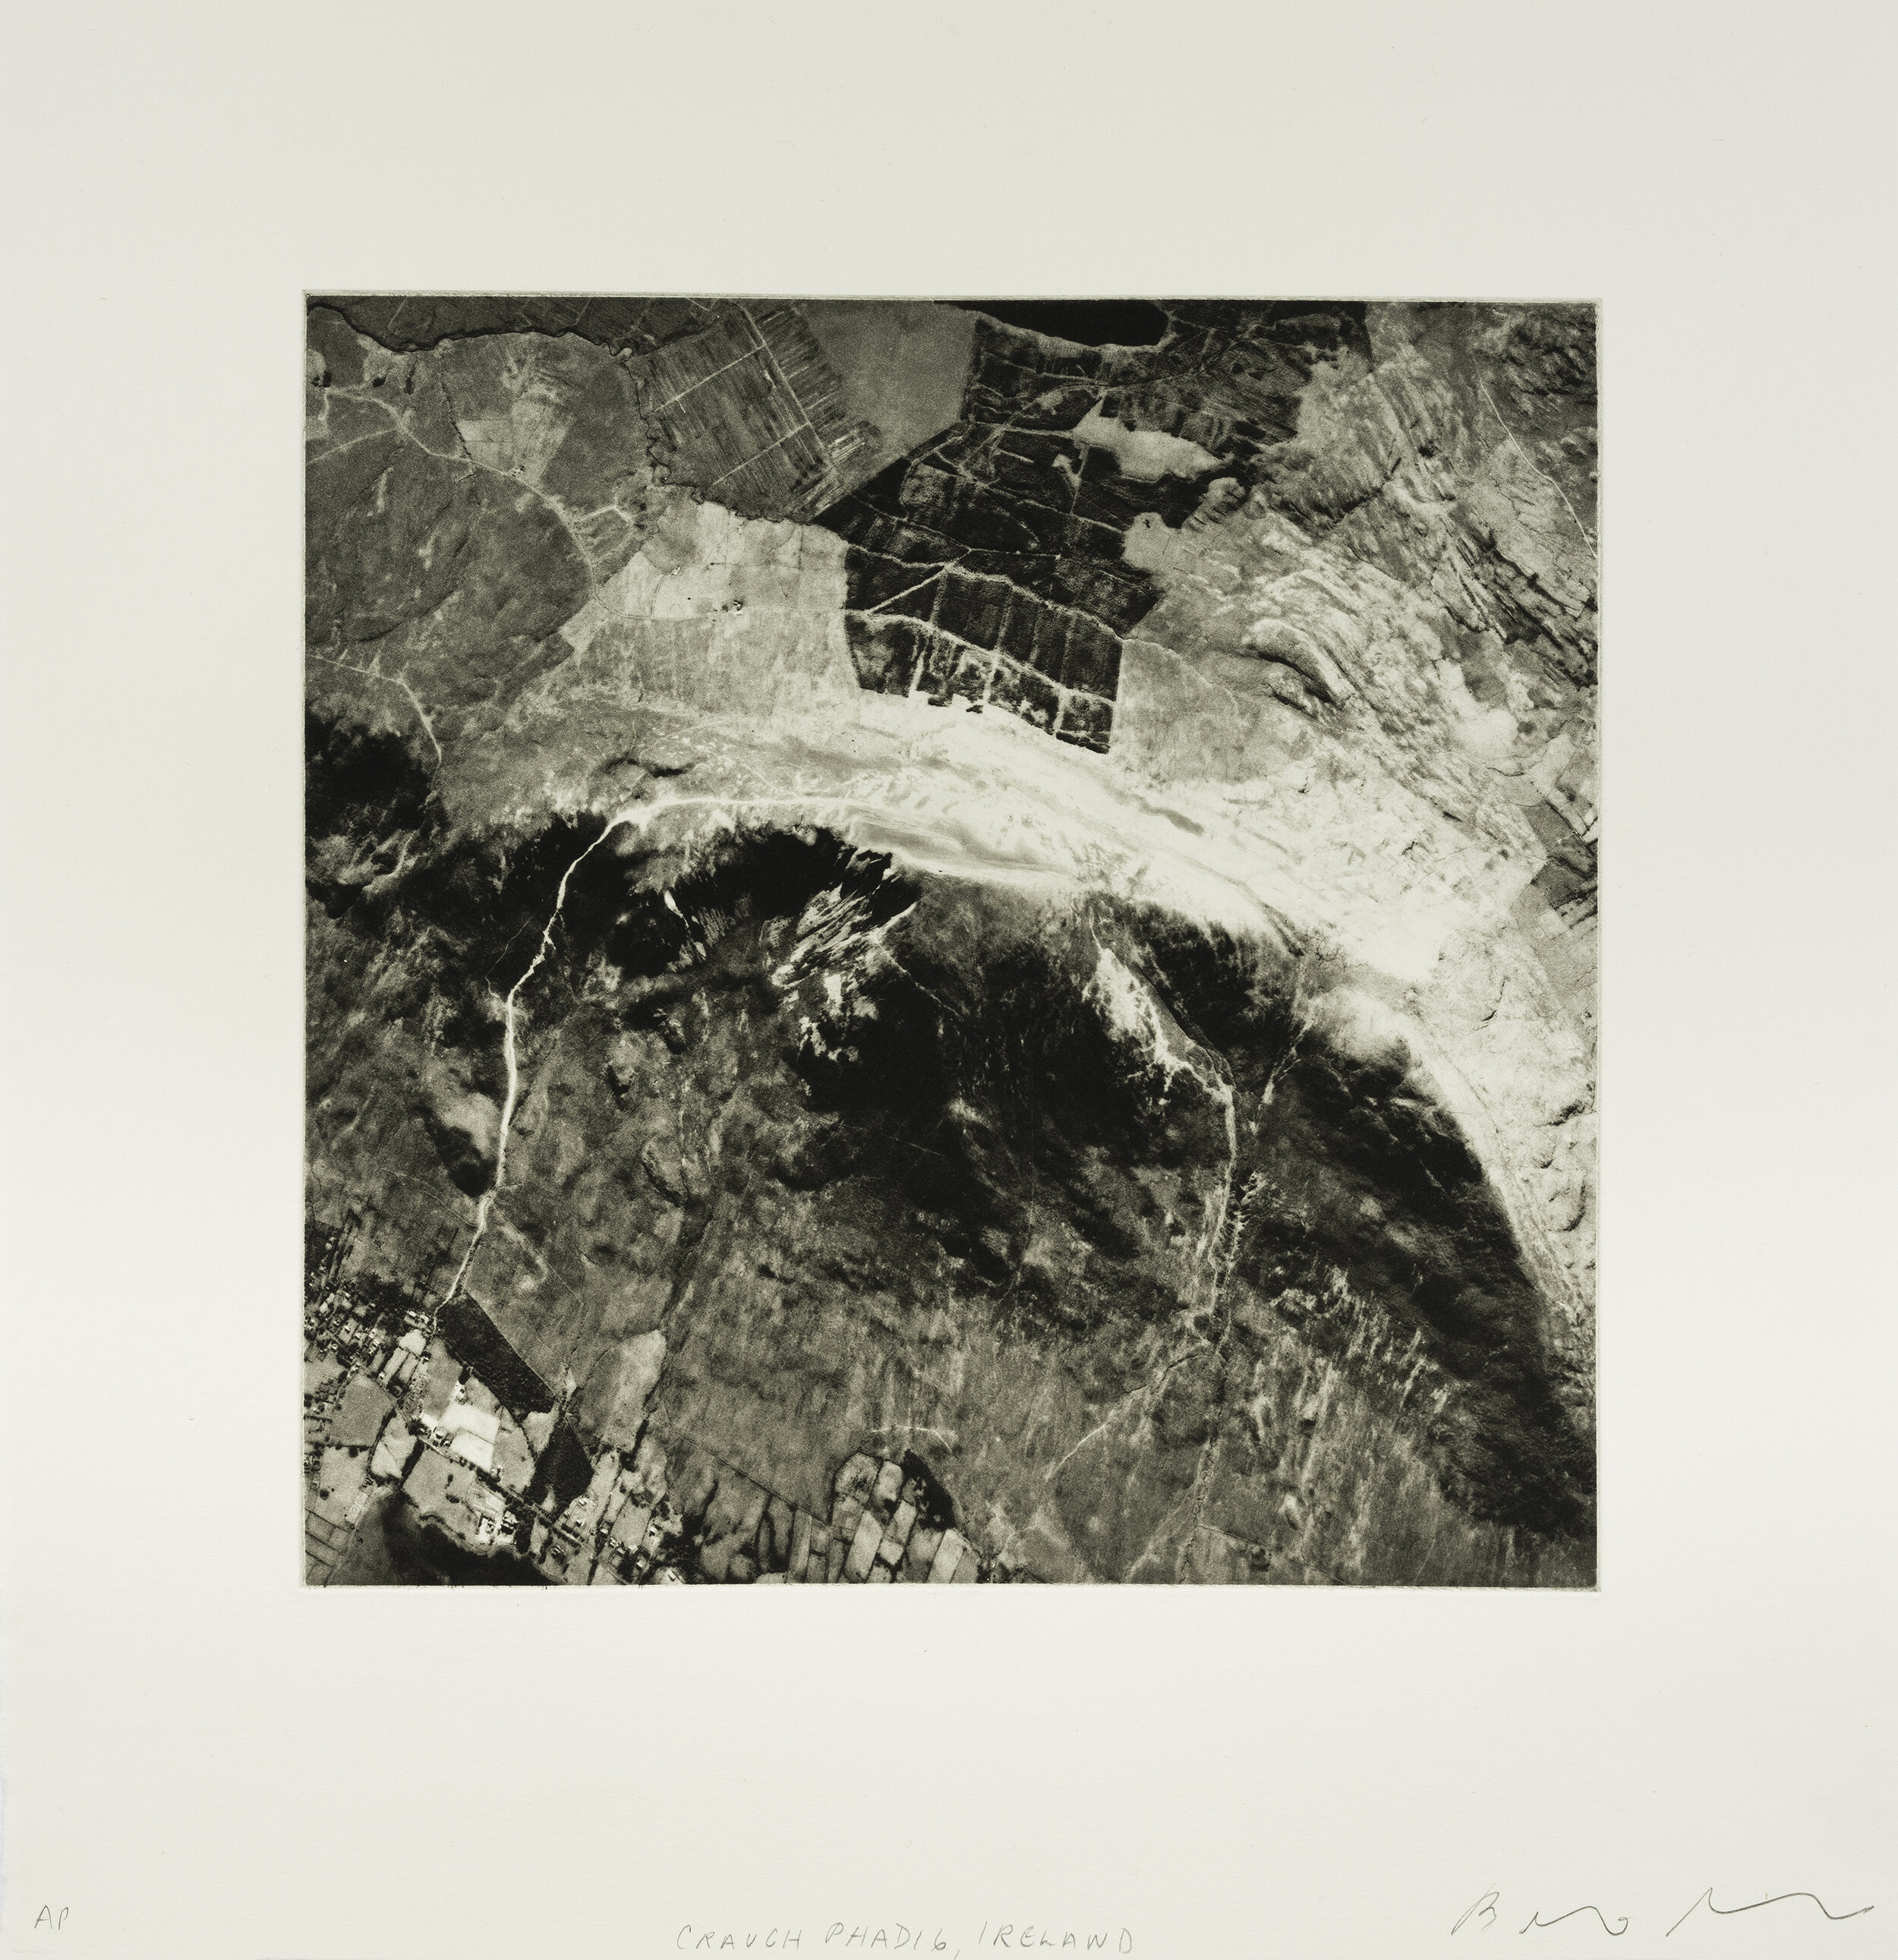    Croagh Patrick, Ireland, 2020      Copperplate photogravure etching on cotton rag paper, plate size; 10.6 x 10.6, paper size; 16 x 15.5, edition 10  